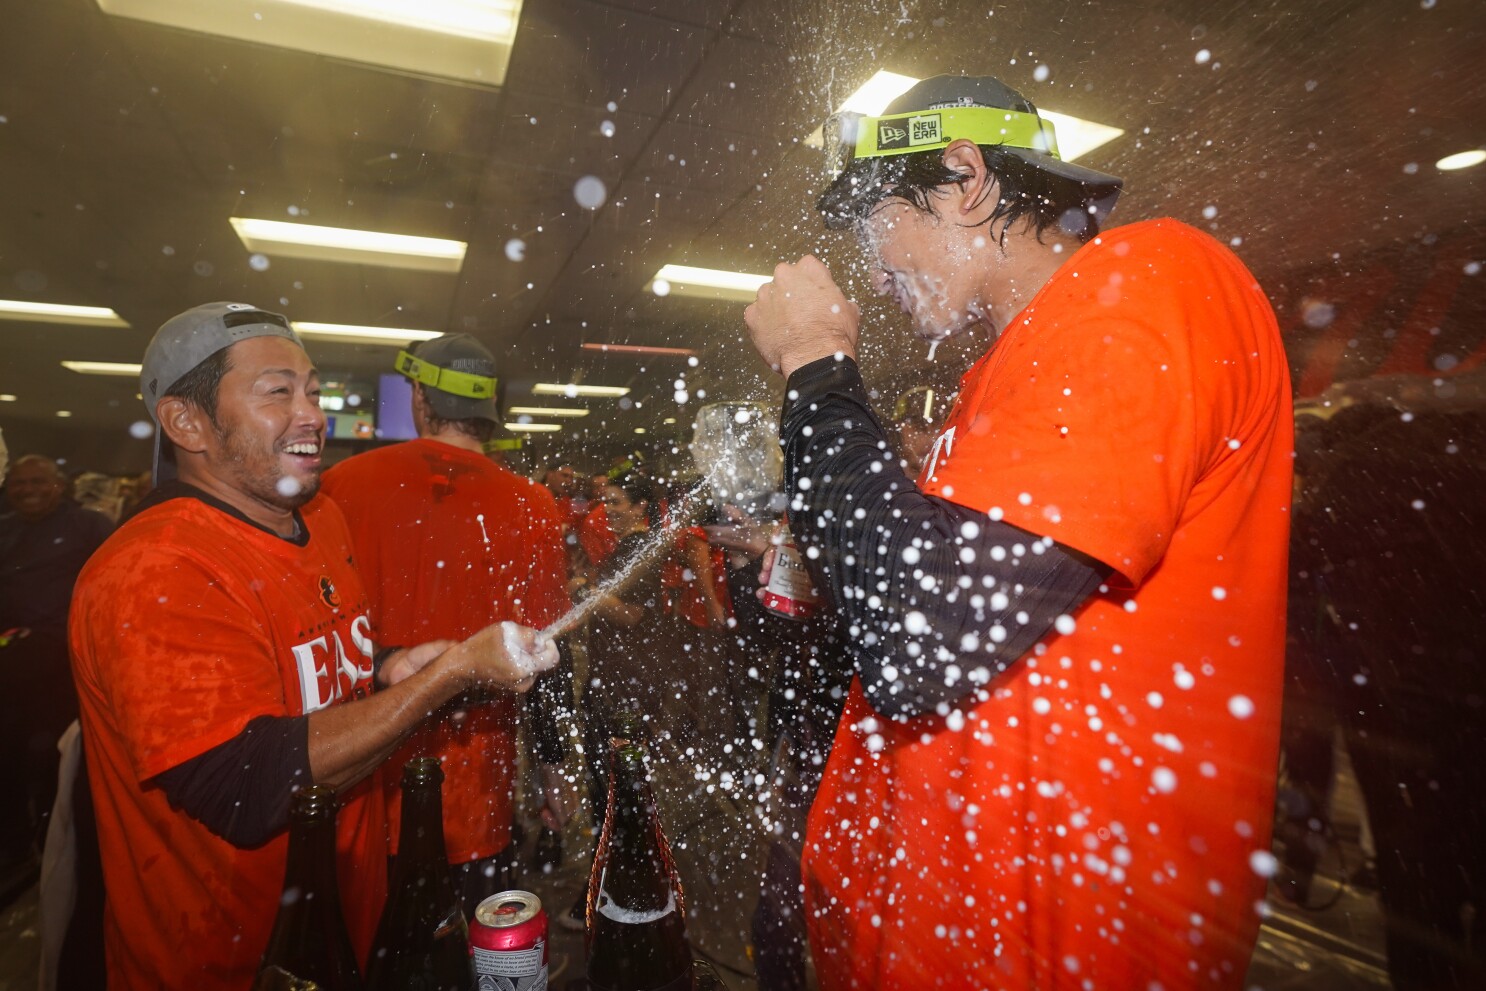 100 wins and an AL East crown for the Orioles ✓ #baltimoreorioles #bal, Baltimore Orioles